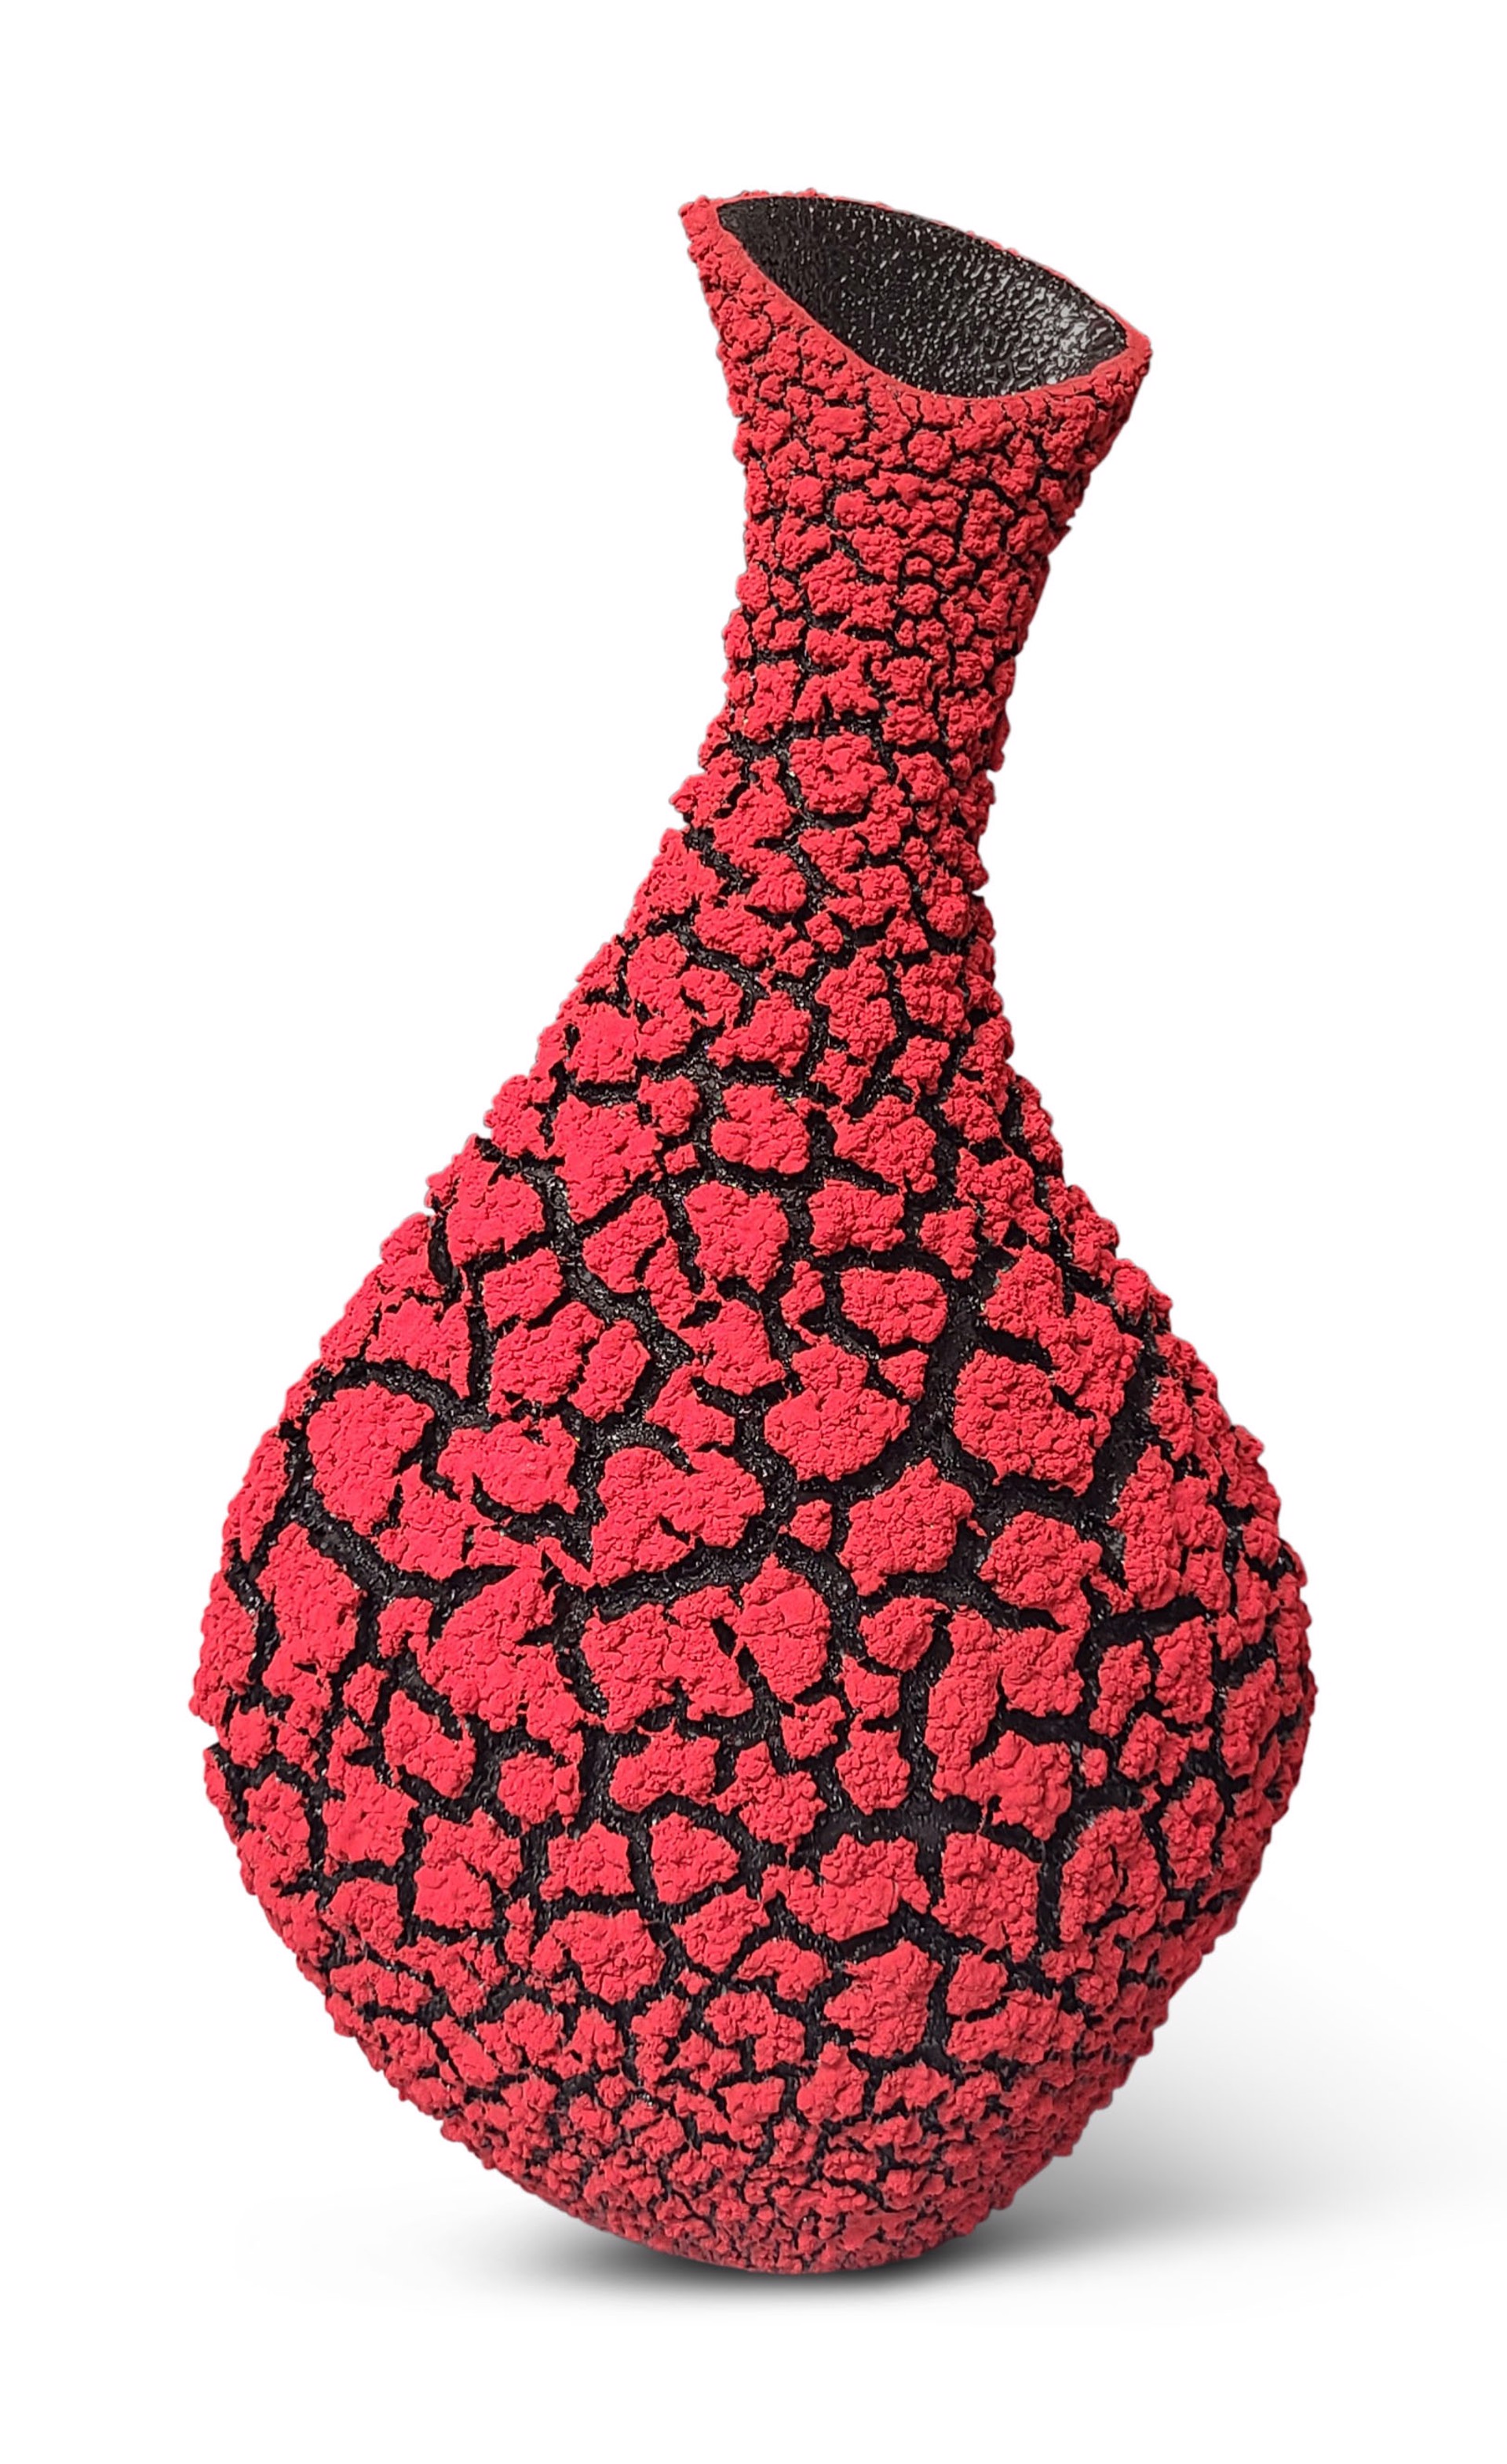 Narrow Necked Vase ~ Red (Other colors can be ordered) by Randy O'Brien